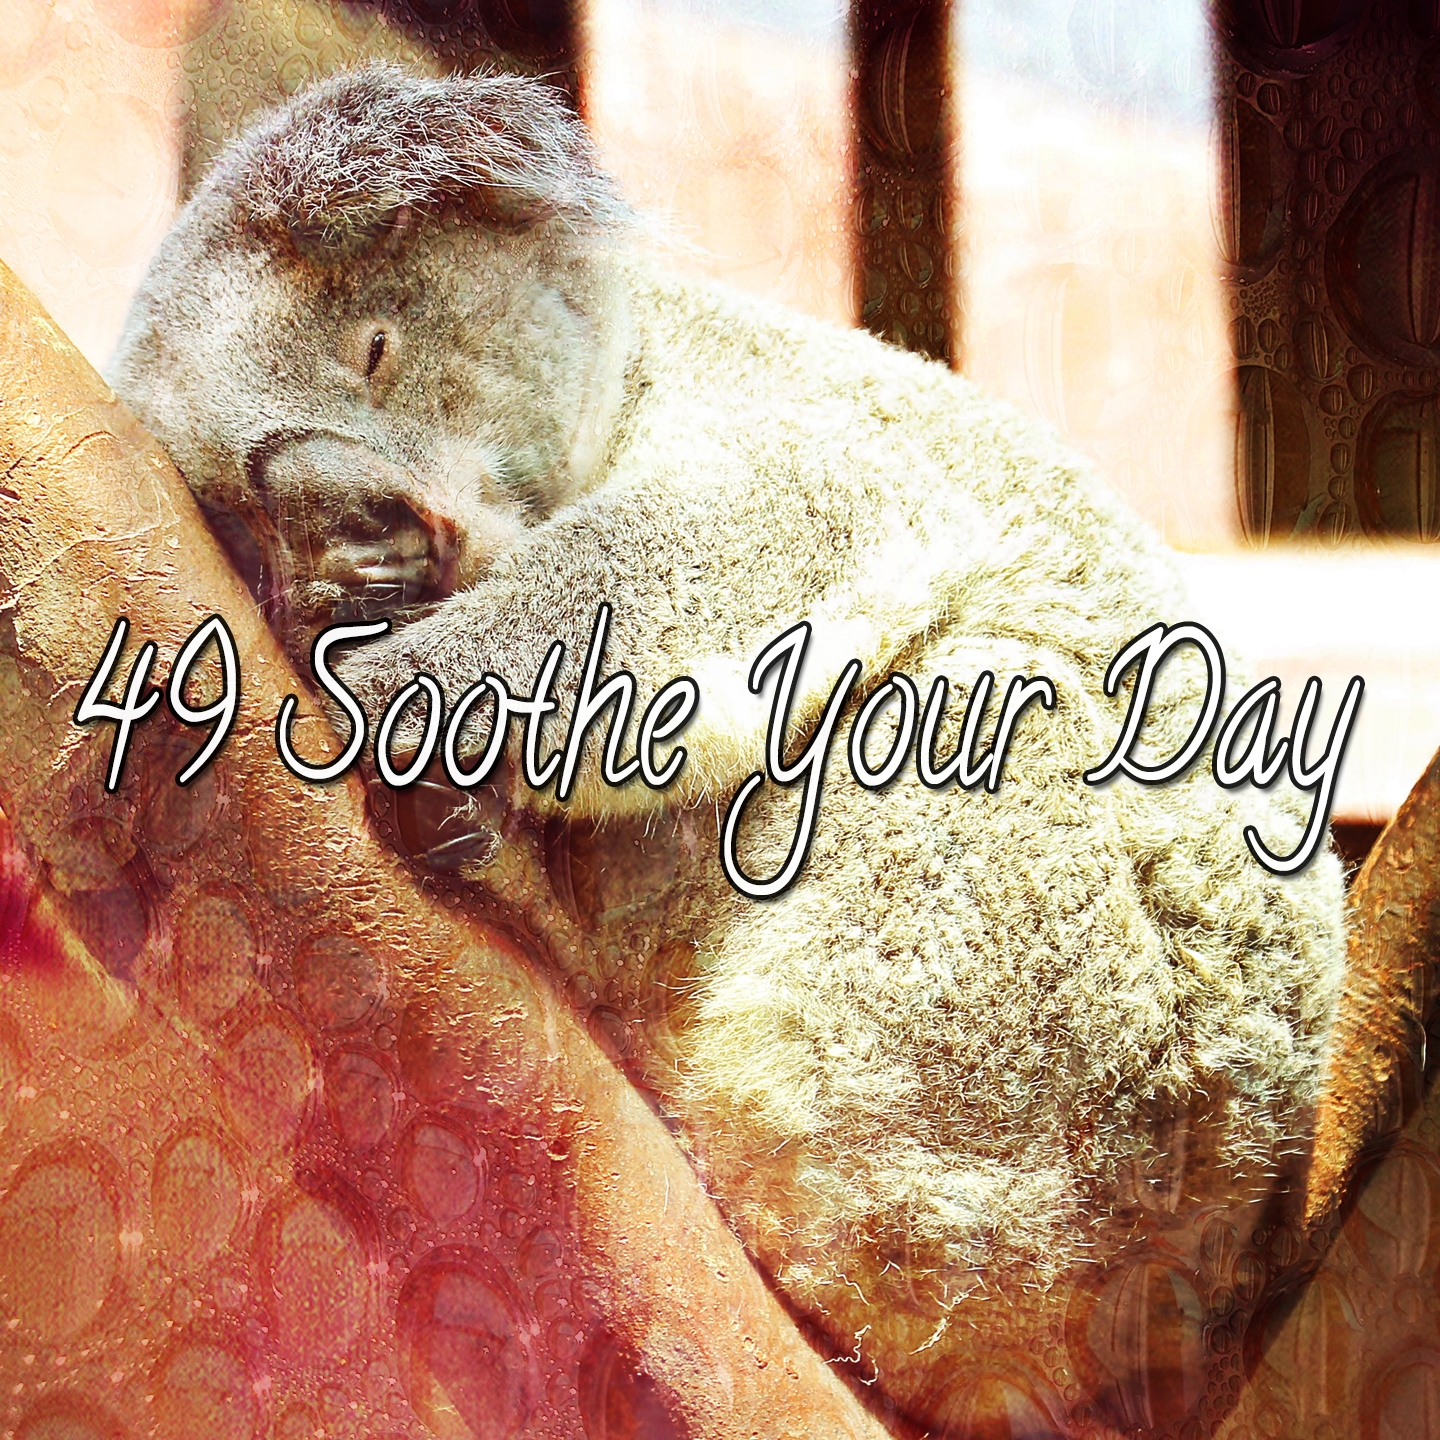 49 Soothe Your Day